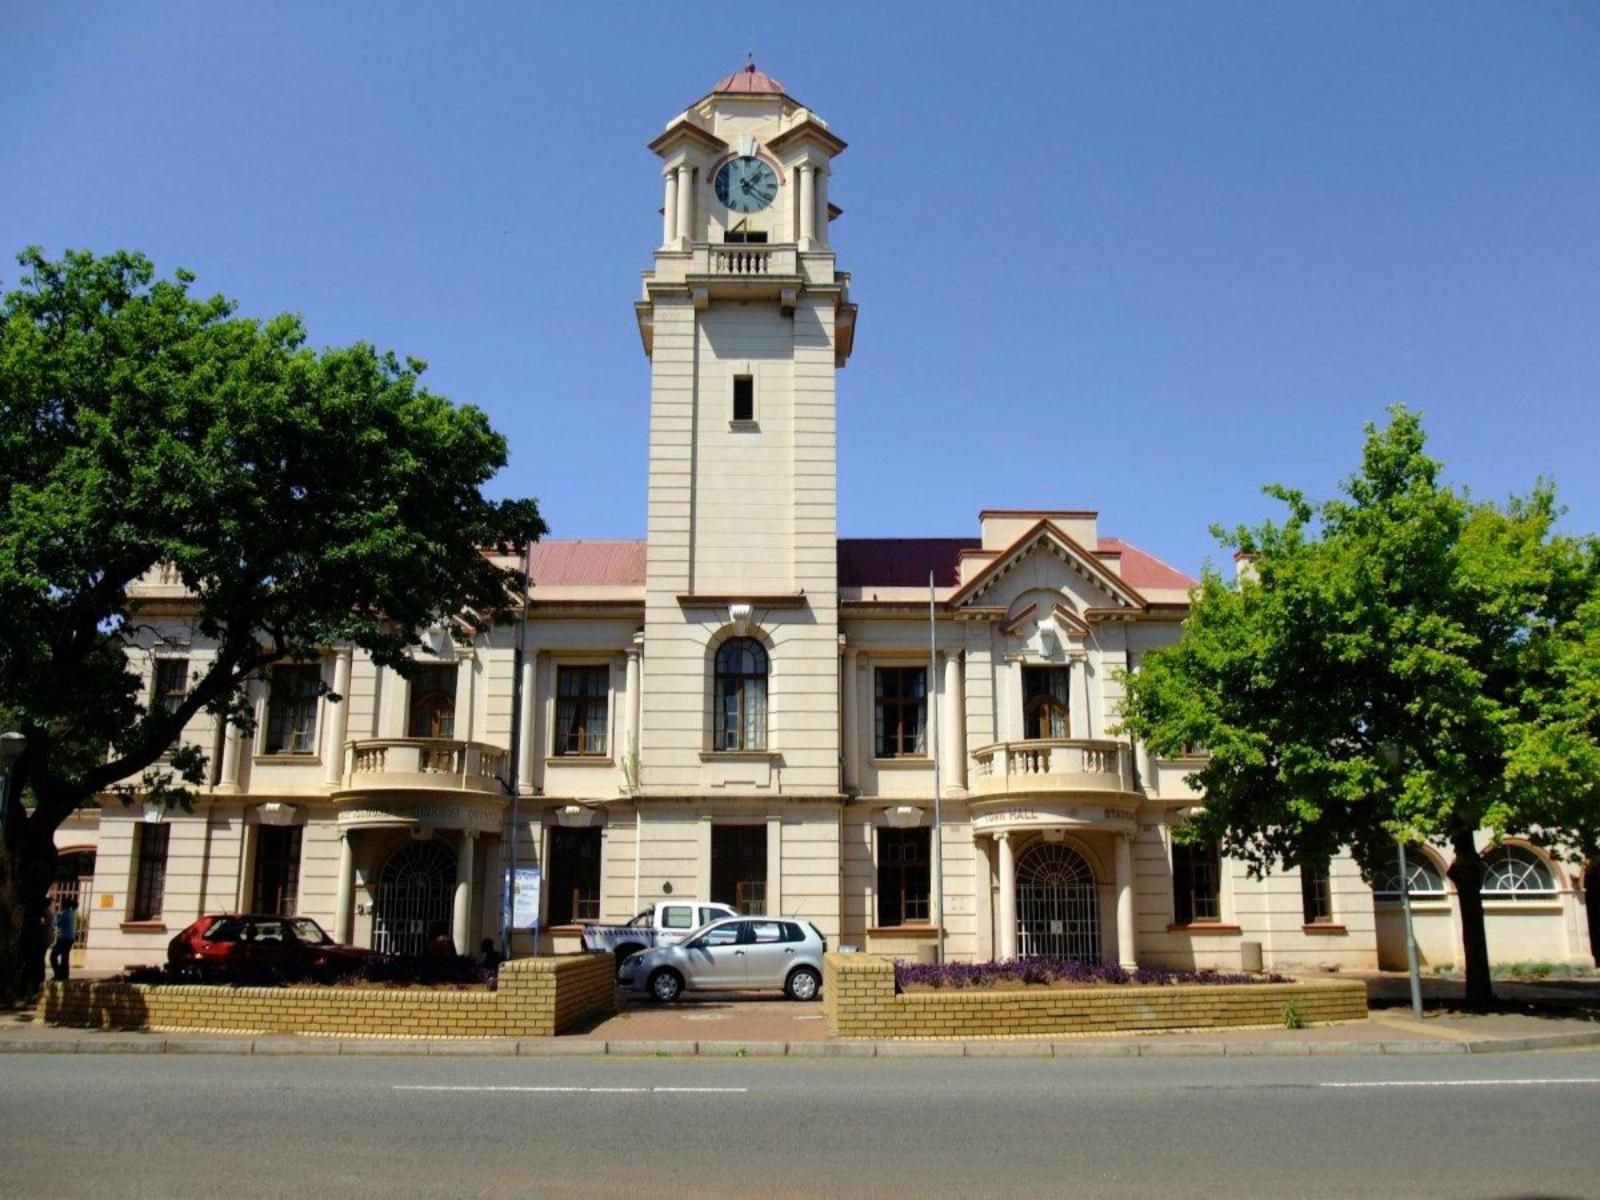 Potch Best Rest Potchefstroom North West Province South Africa Clock, Architecture, House, Building